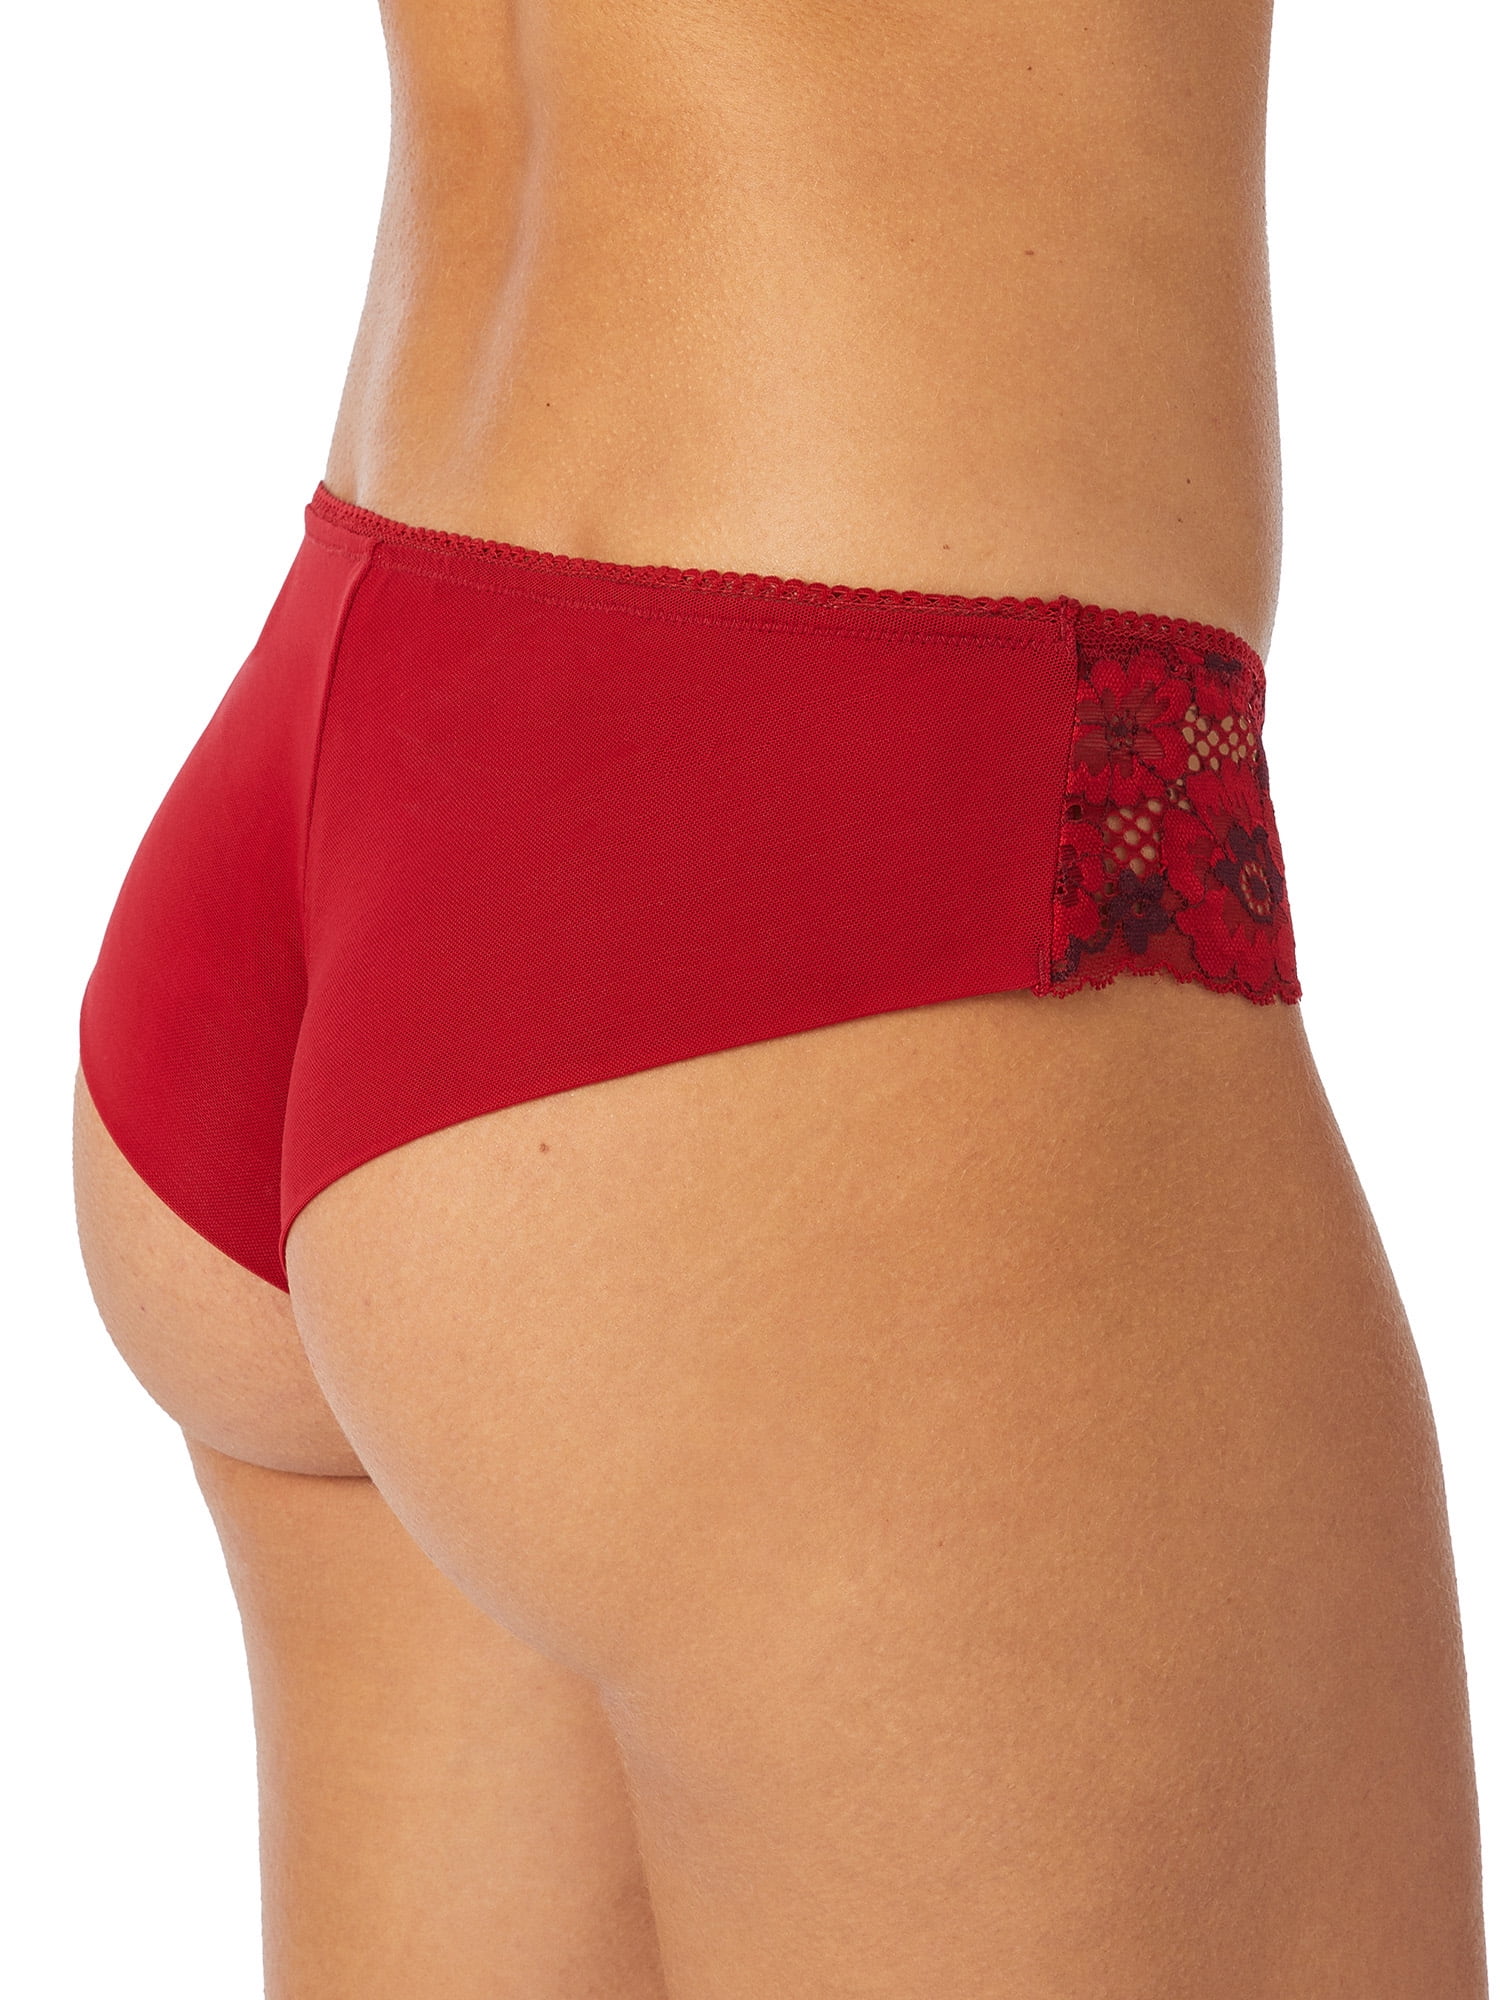 Adored by Adore Me Women's Chelsey Payal Cheeky Underwear, 2-Pack, Sizes XS  to XXXL 